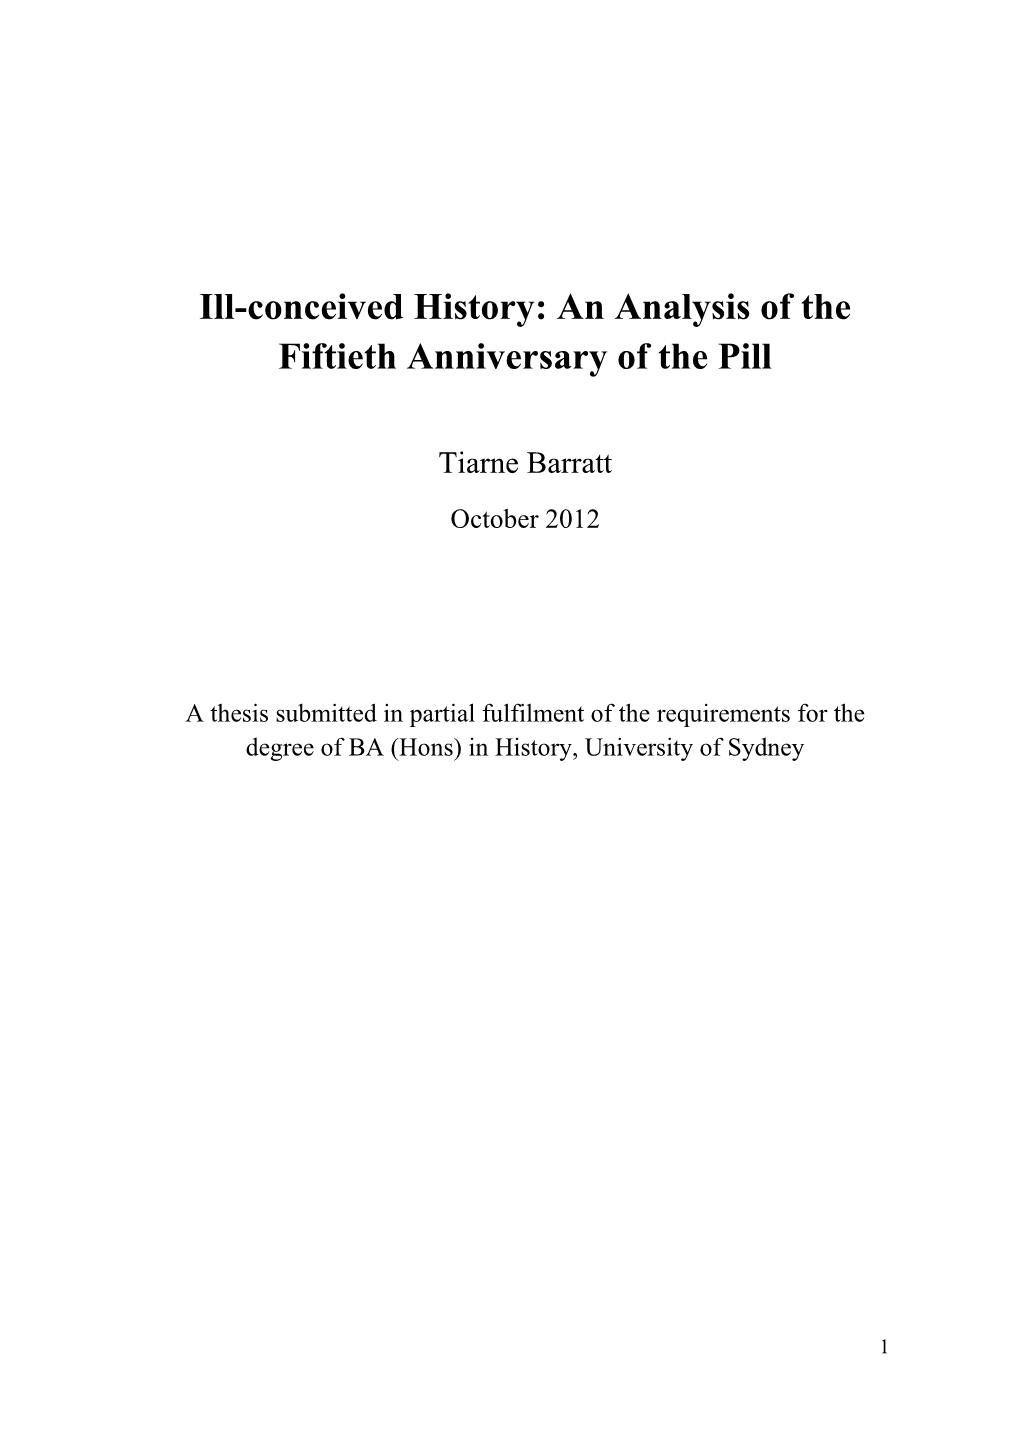 Ill-Conceived History: an Analysis of the Fiftieth Anniversary of the Pill